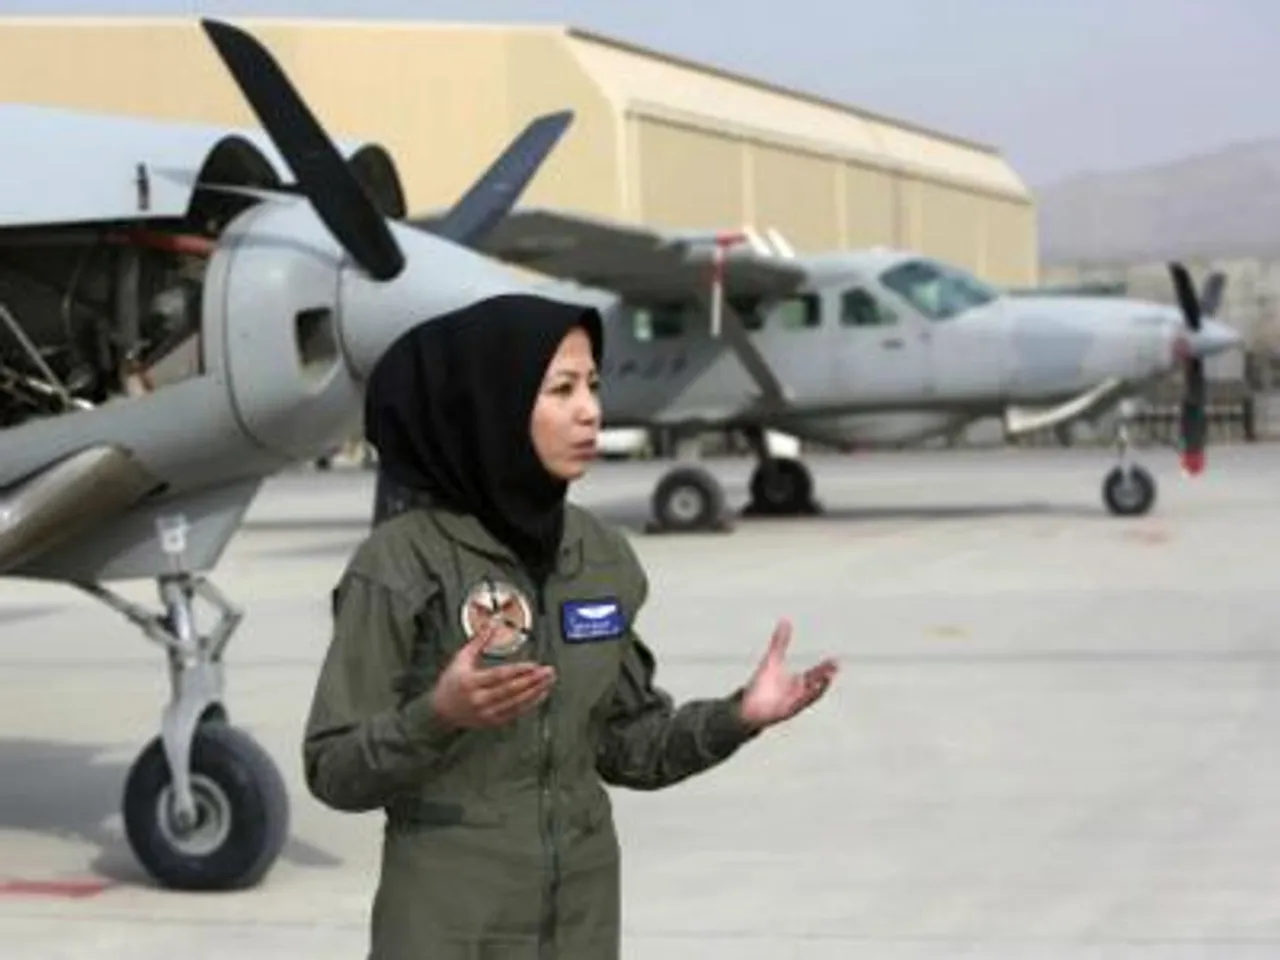 Afghanistan's efforts to welcome women in military